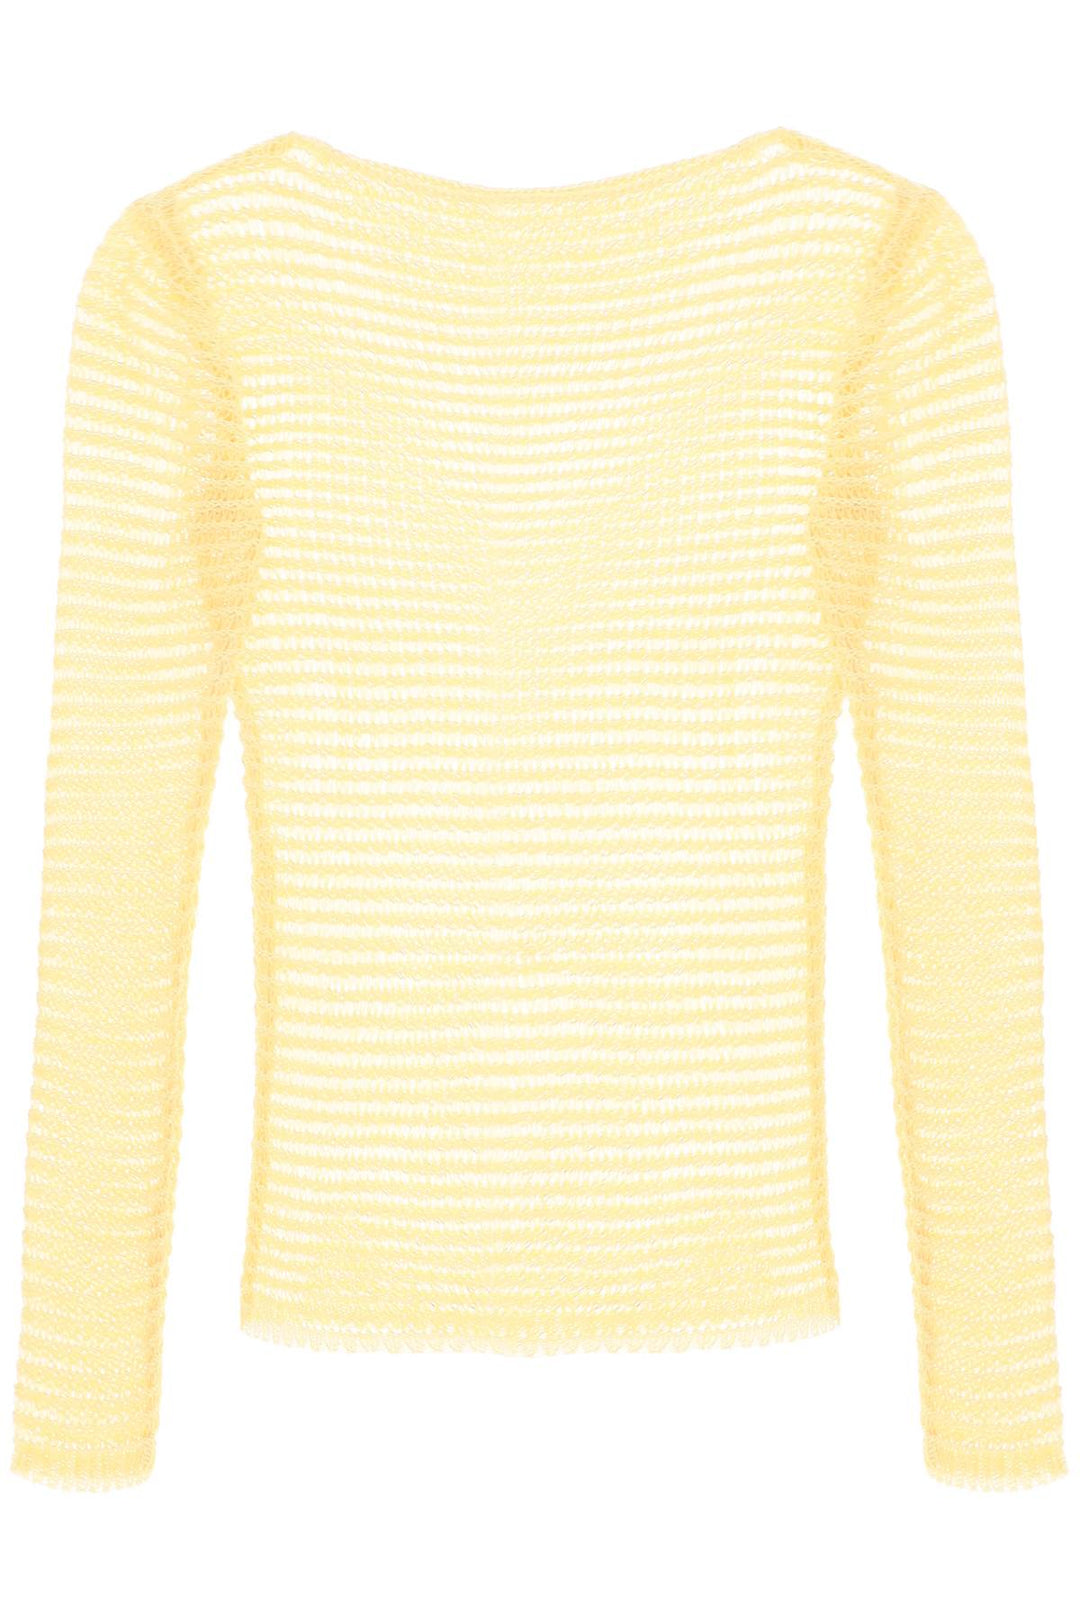 Paloma Wool Replace With Double Quotetaxi Mesh Perforated   Giallo